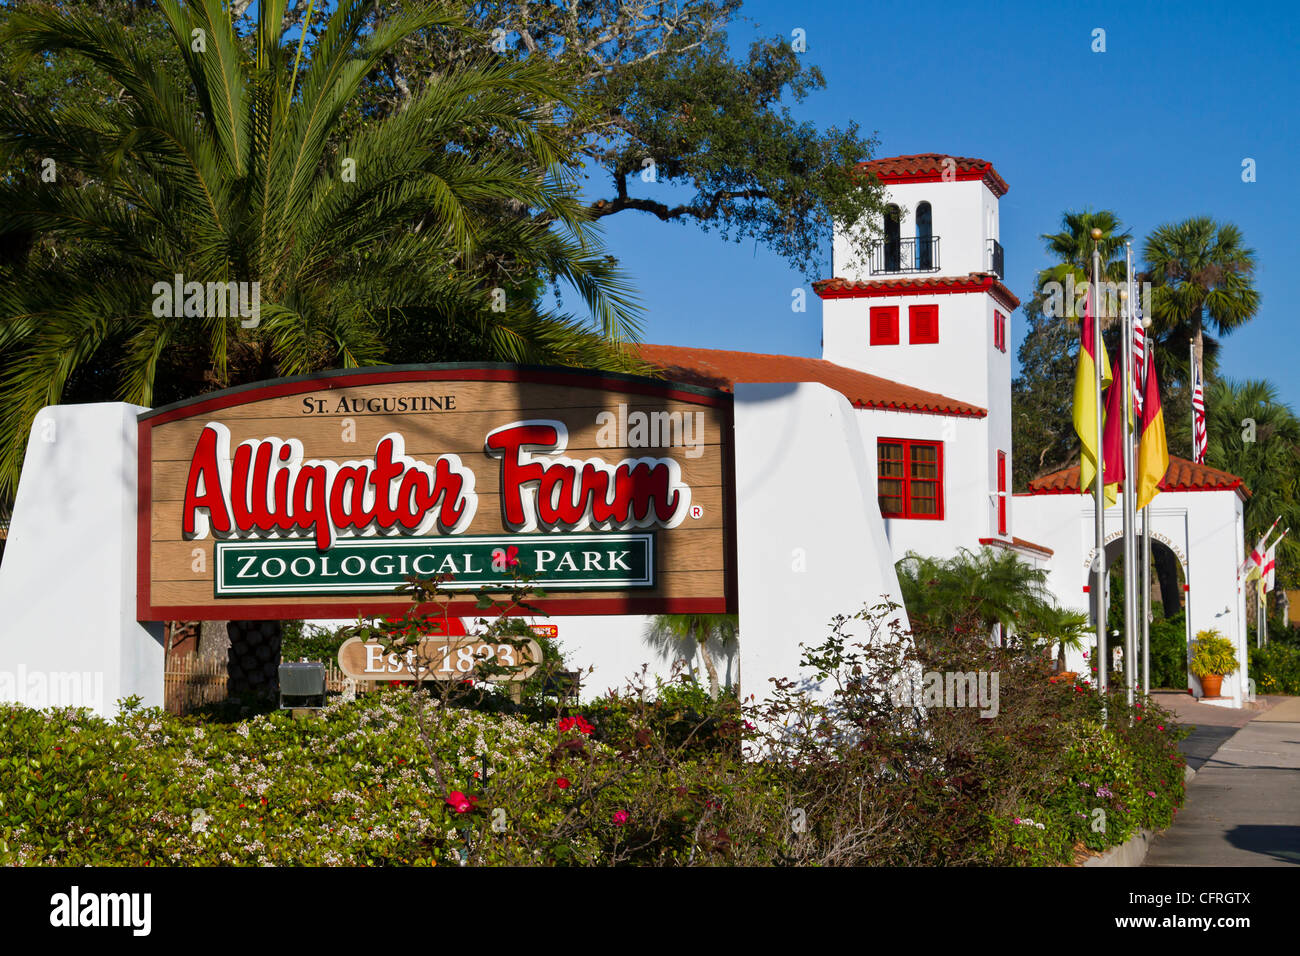 The entrance sign at the Alligator Farm and bird rookery in St. Augustine, Florida, USA. Stock Photo